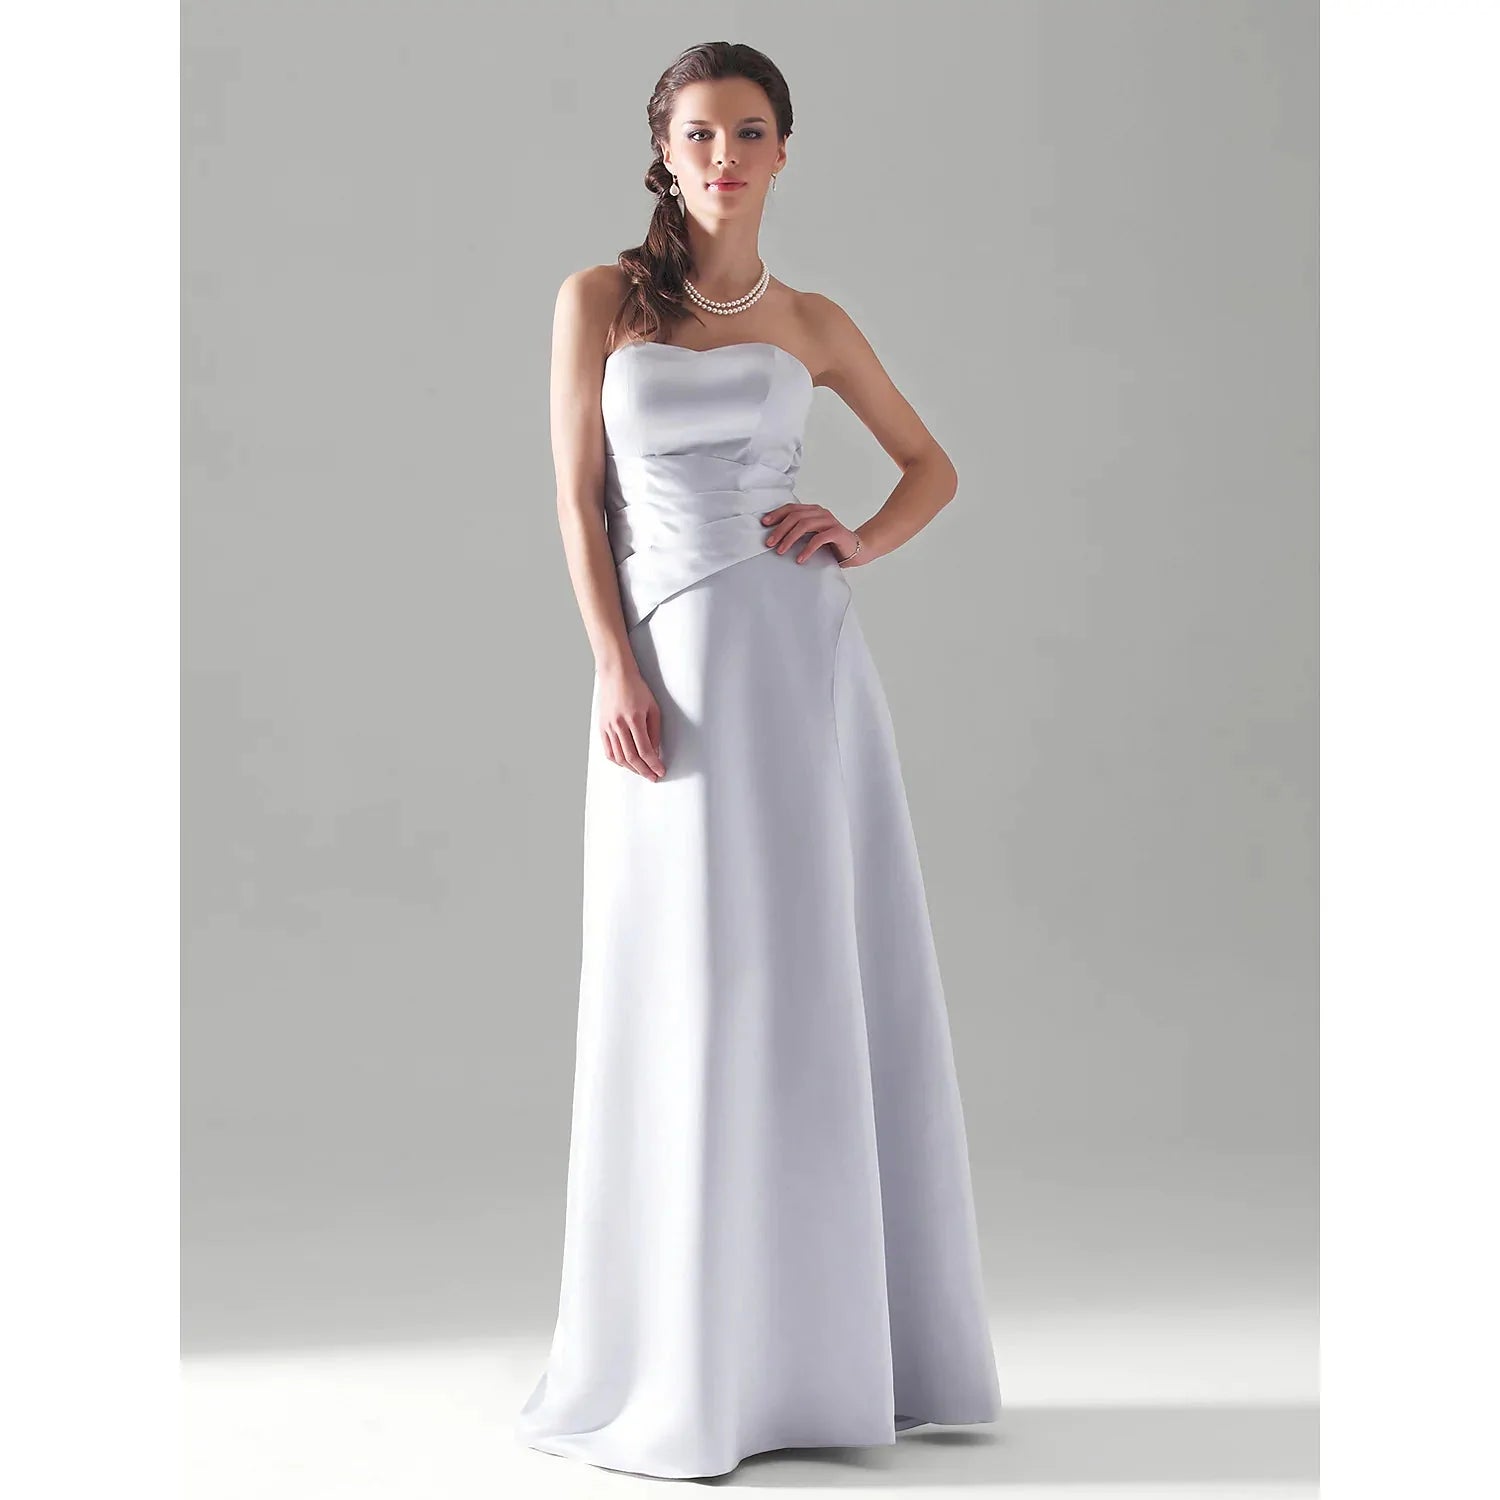 Princess / A-Line Bridesmaid Dress Strapless Sleeveless Open Back Floor Length Satin with Side Draping - RongMoon